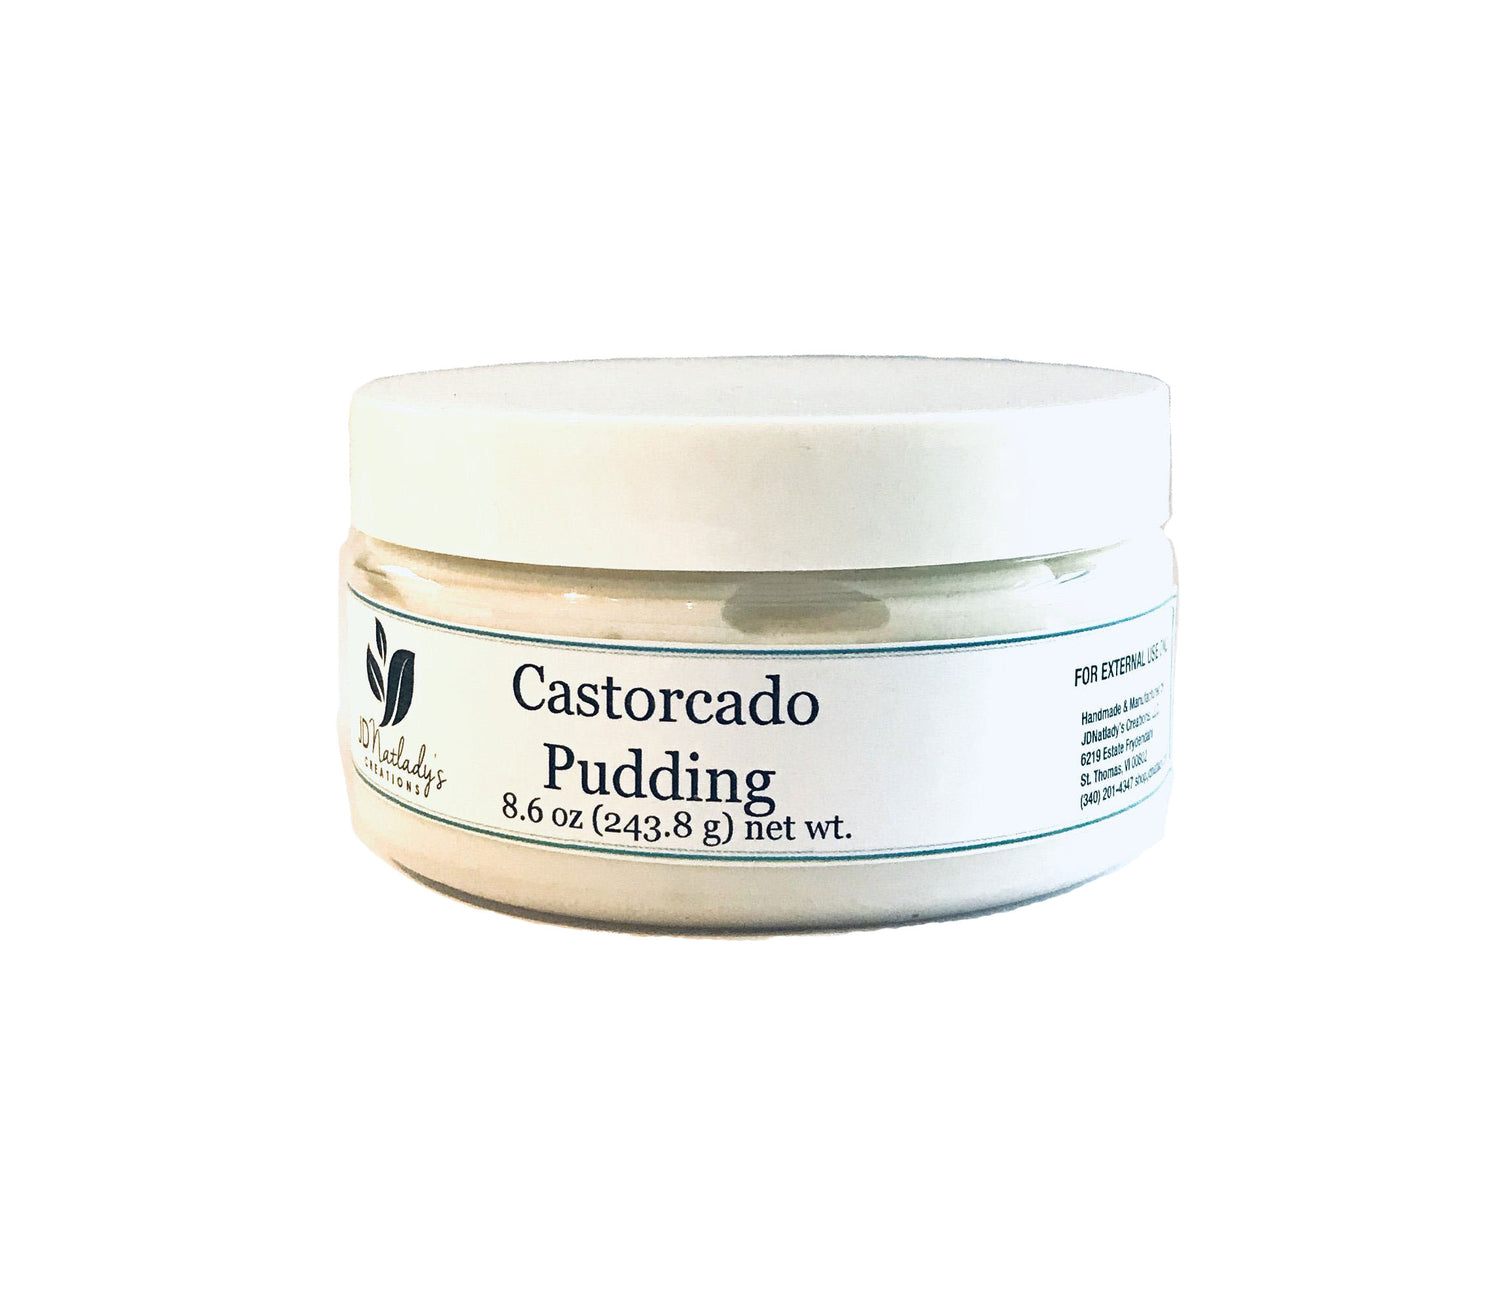 castorcado pudding hair and body pudding by JDNatlady's Creations